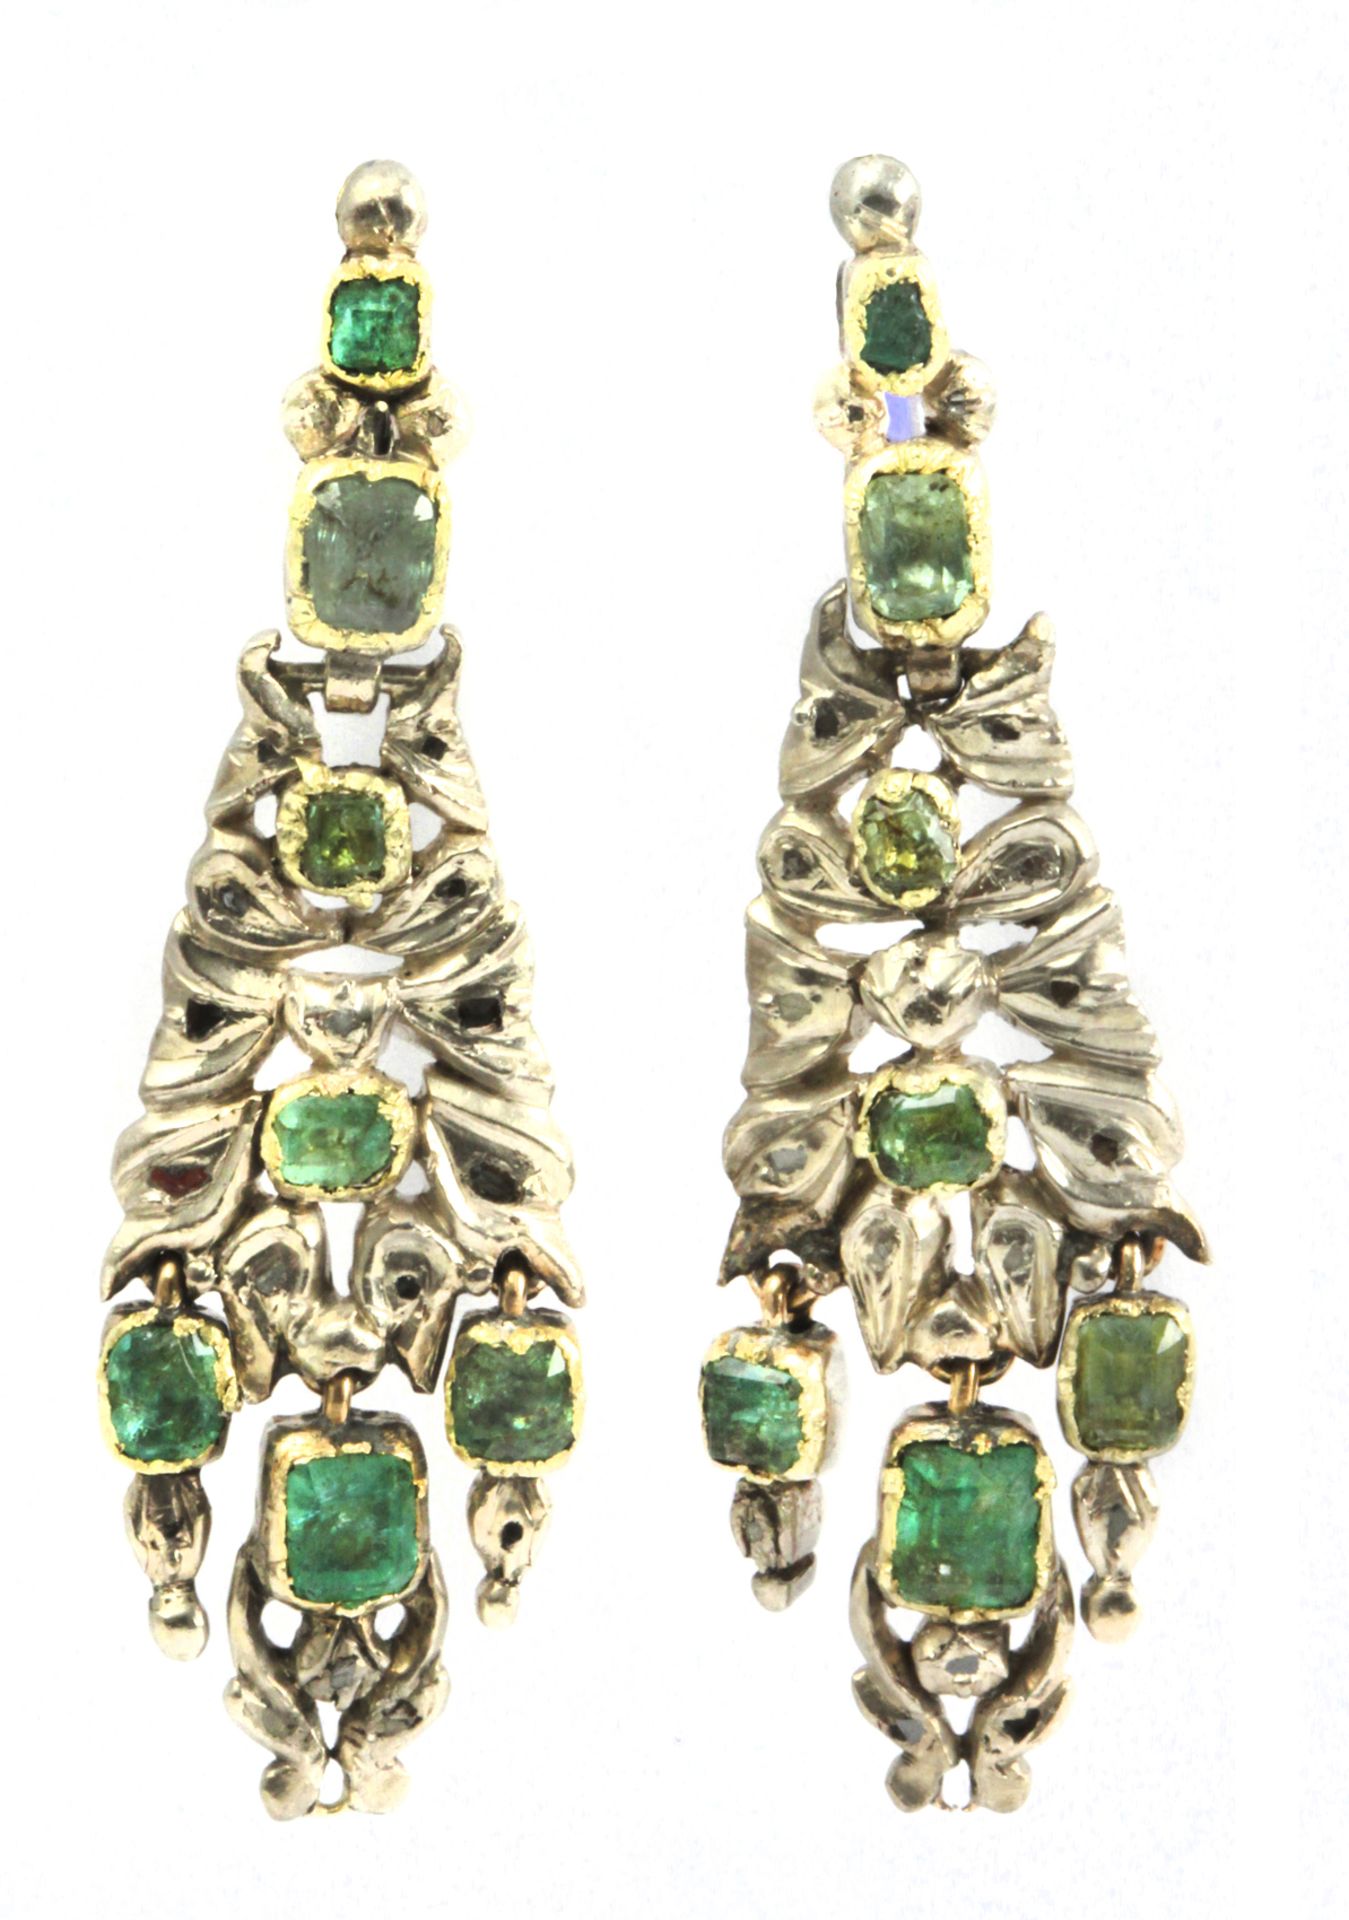 A pair of late 18th century-early 19th century Spanish earrings